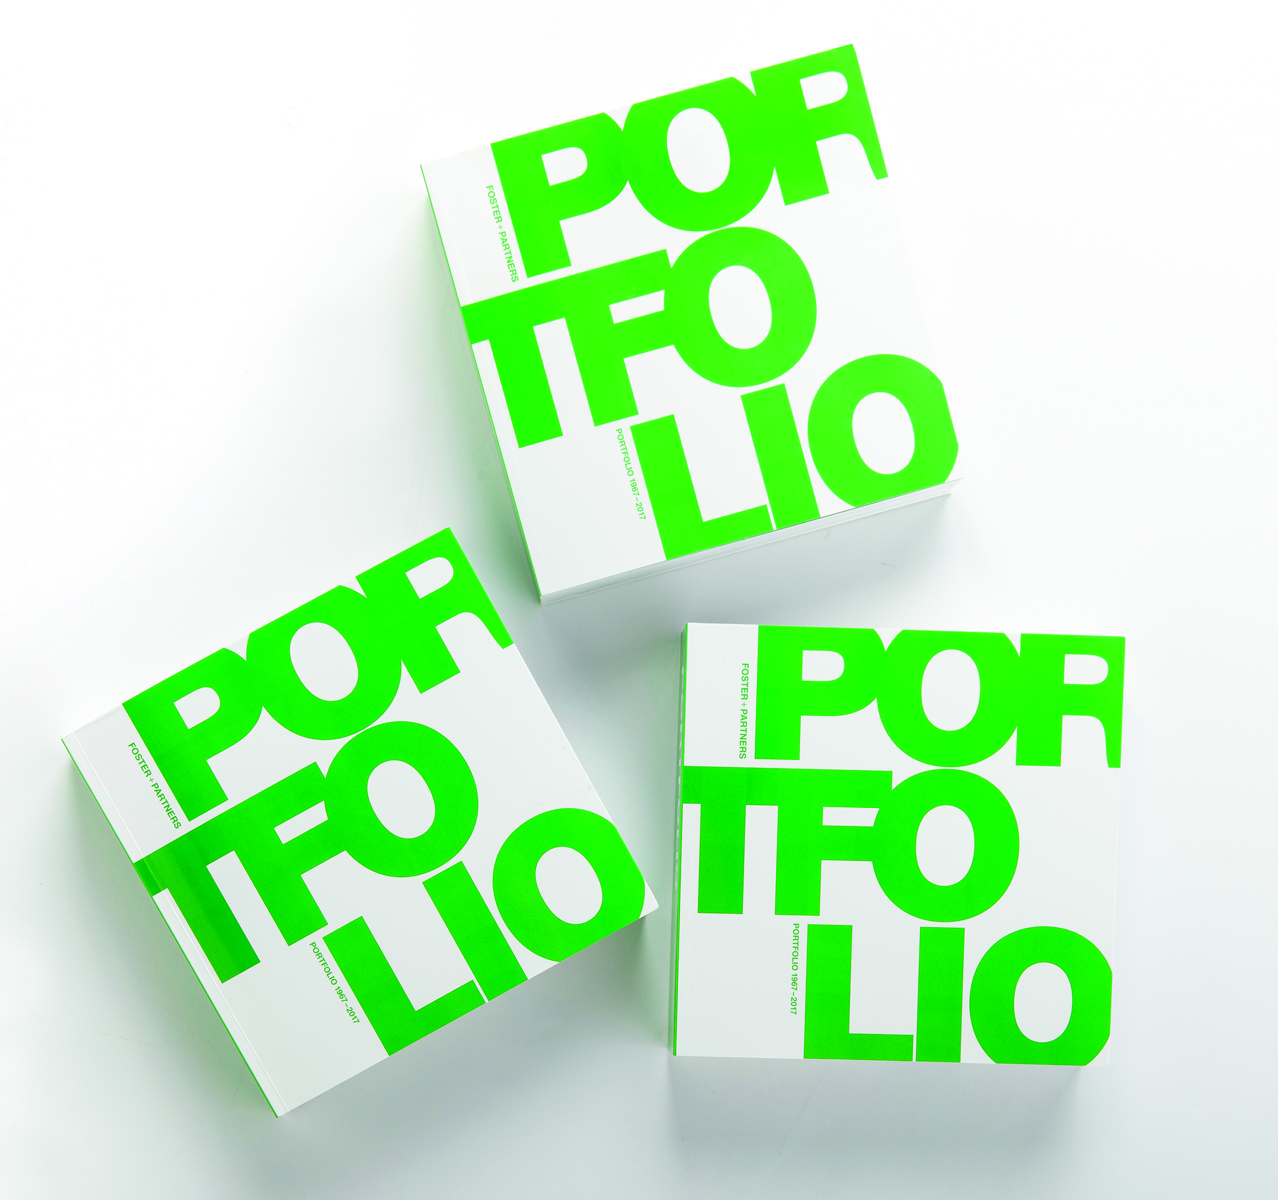 FOSTER + PARTNERS in small green font to top left, PORTFOLIO in green font across cover